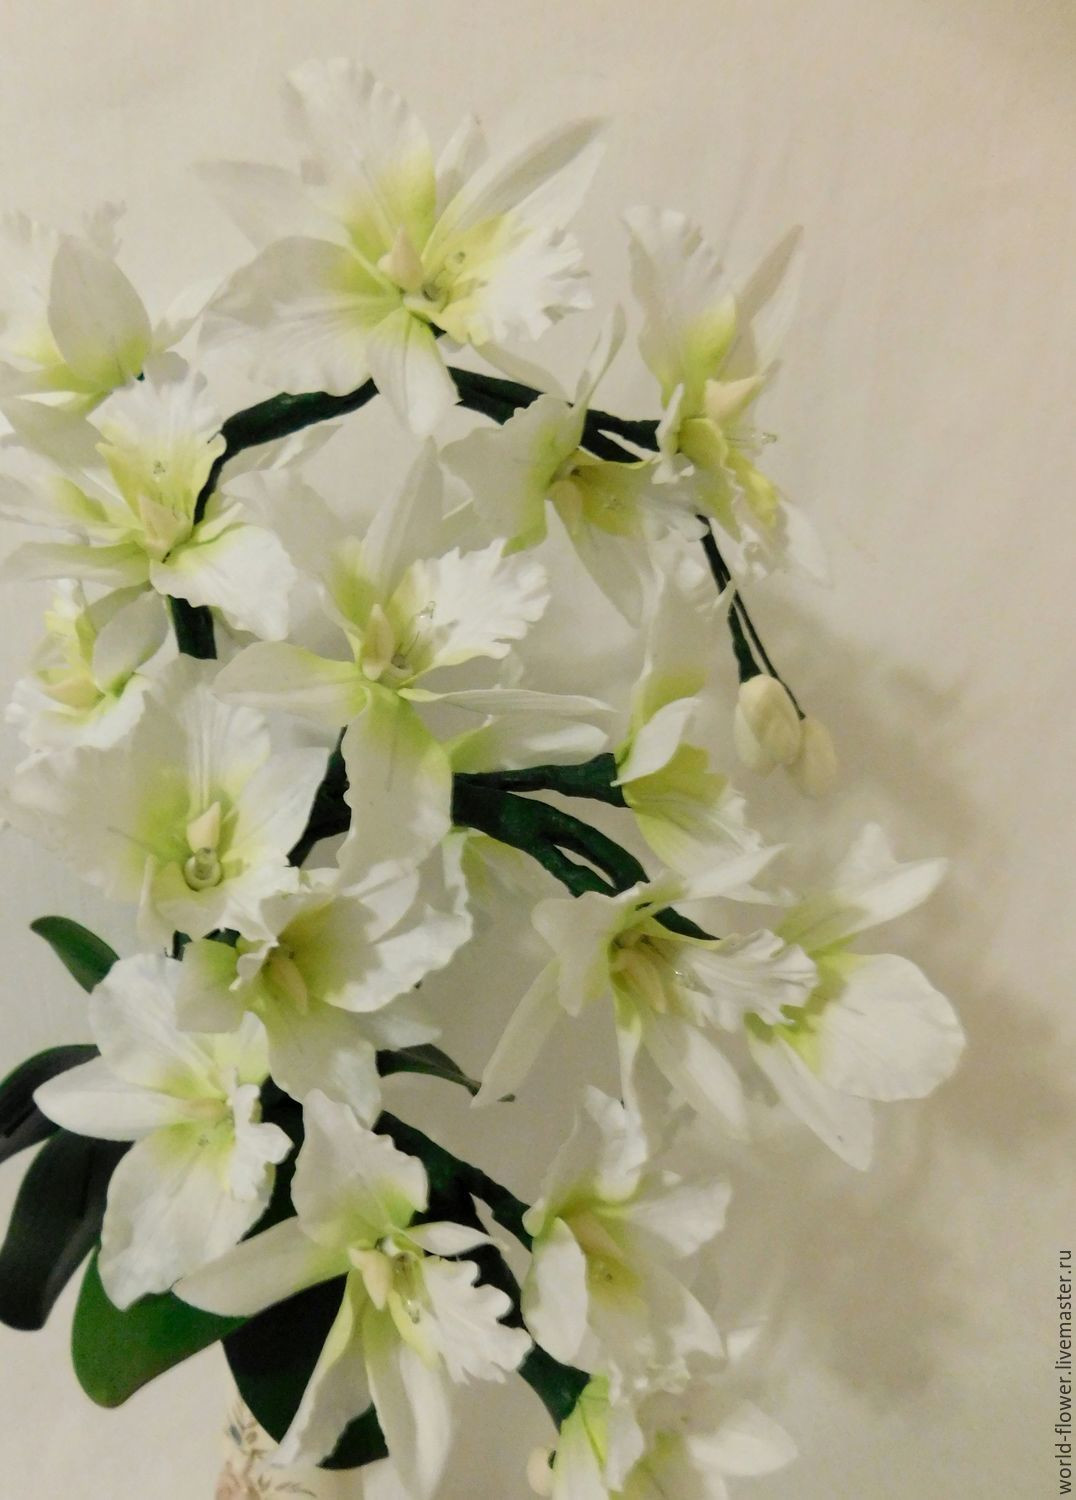 white twigs for vases of bouquet lamp white orchid 3 twigs vase swan shop online on for bouquet lamp white orchid 3 twigs vase swan